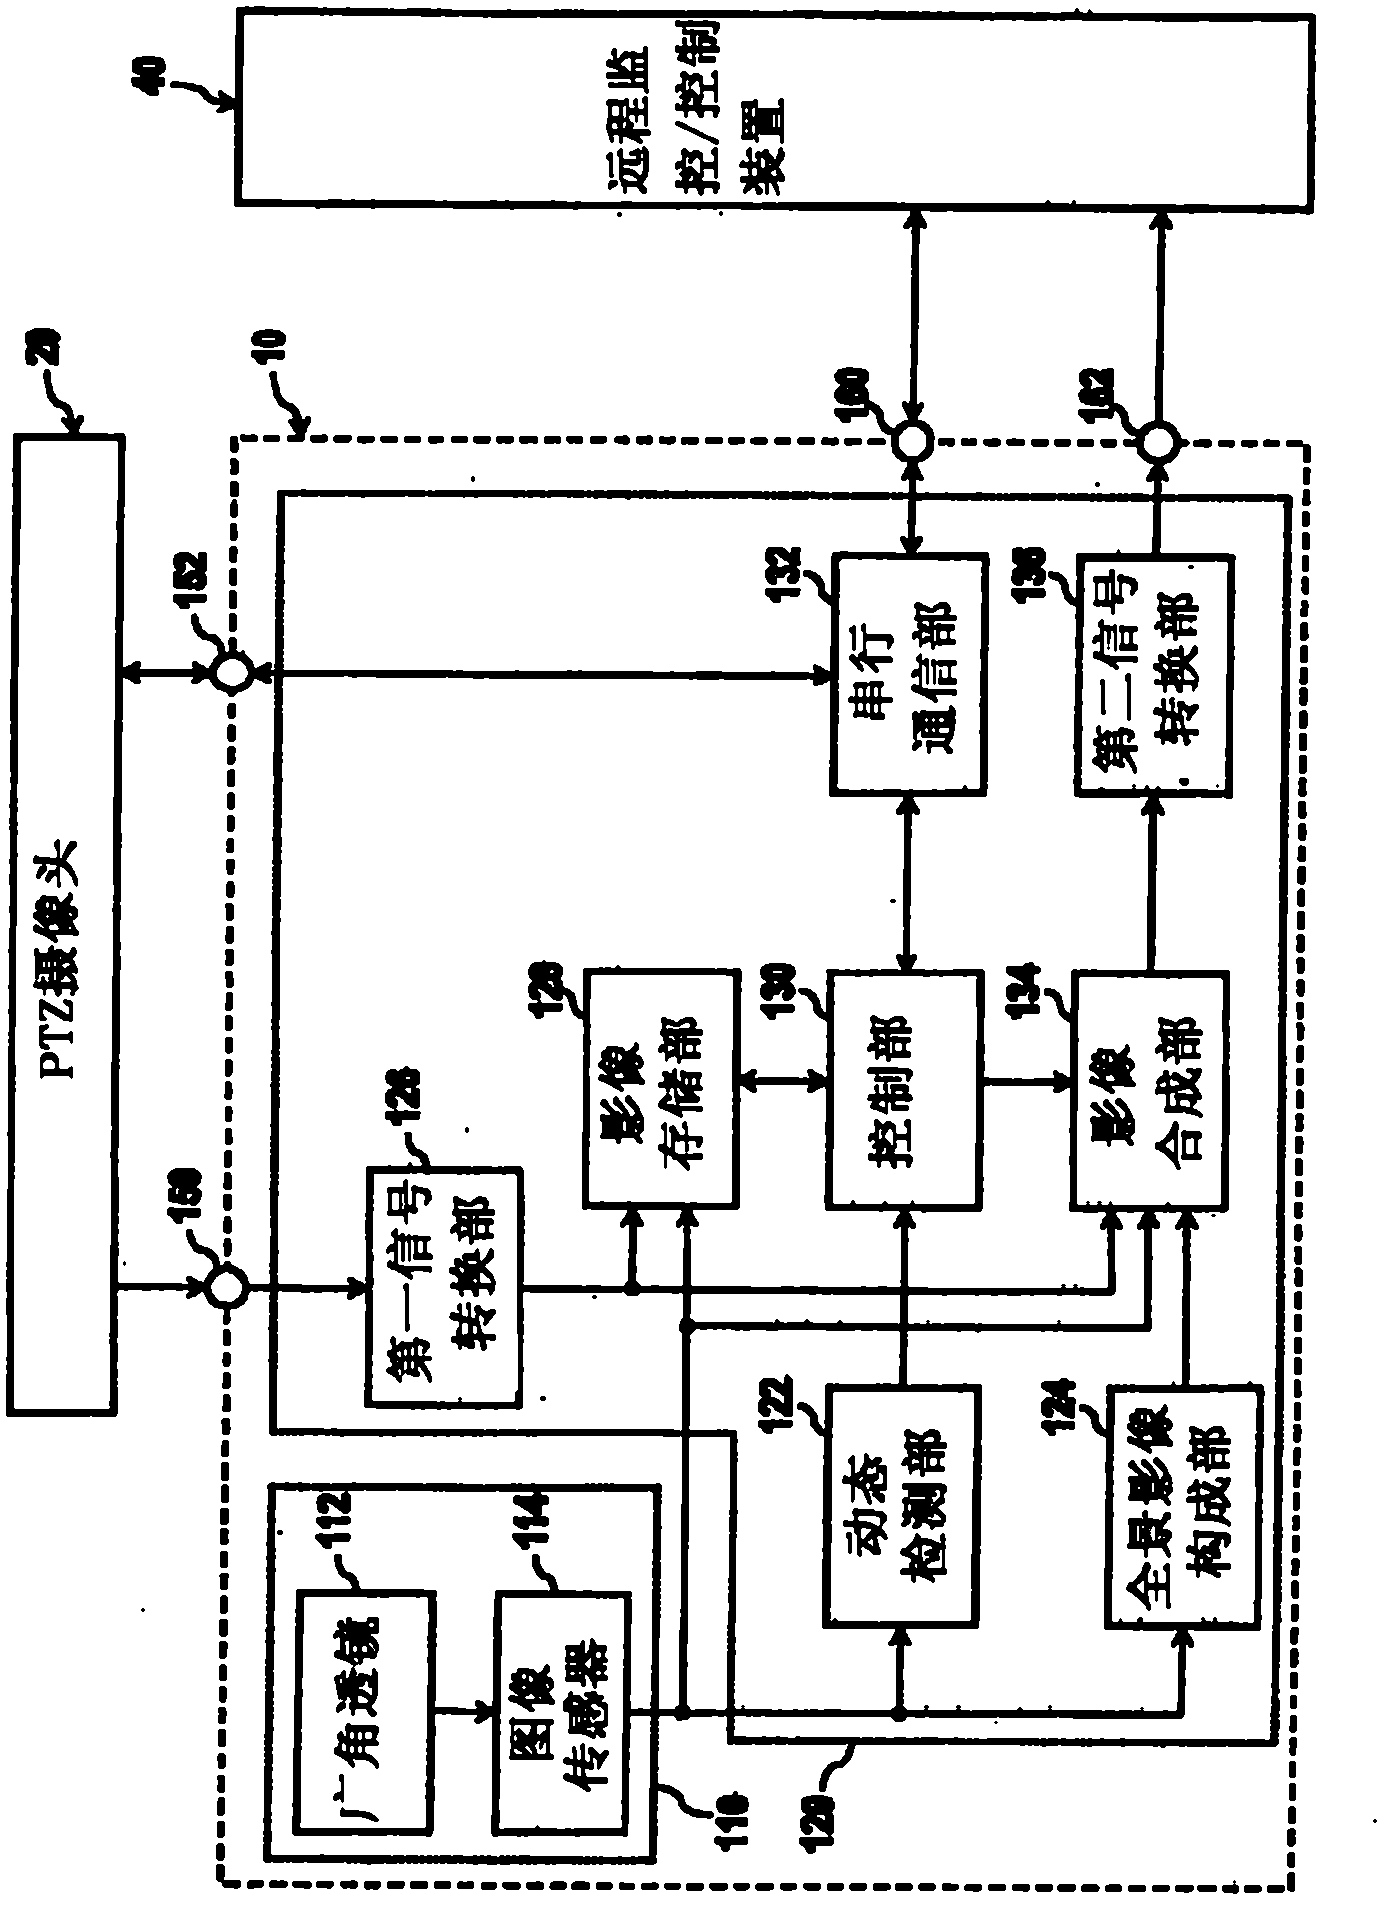 Intelligent monitoring camera apparatus and image monitoring system implementing same